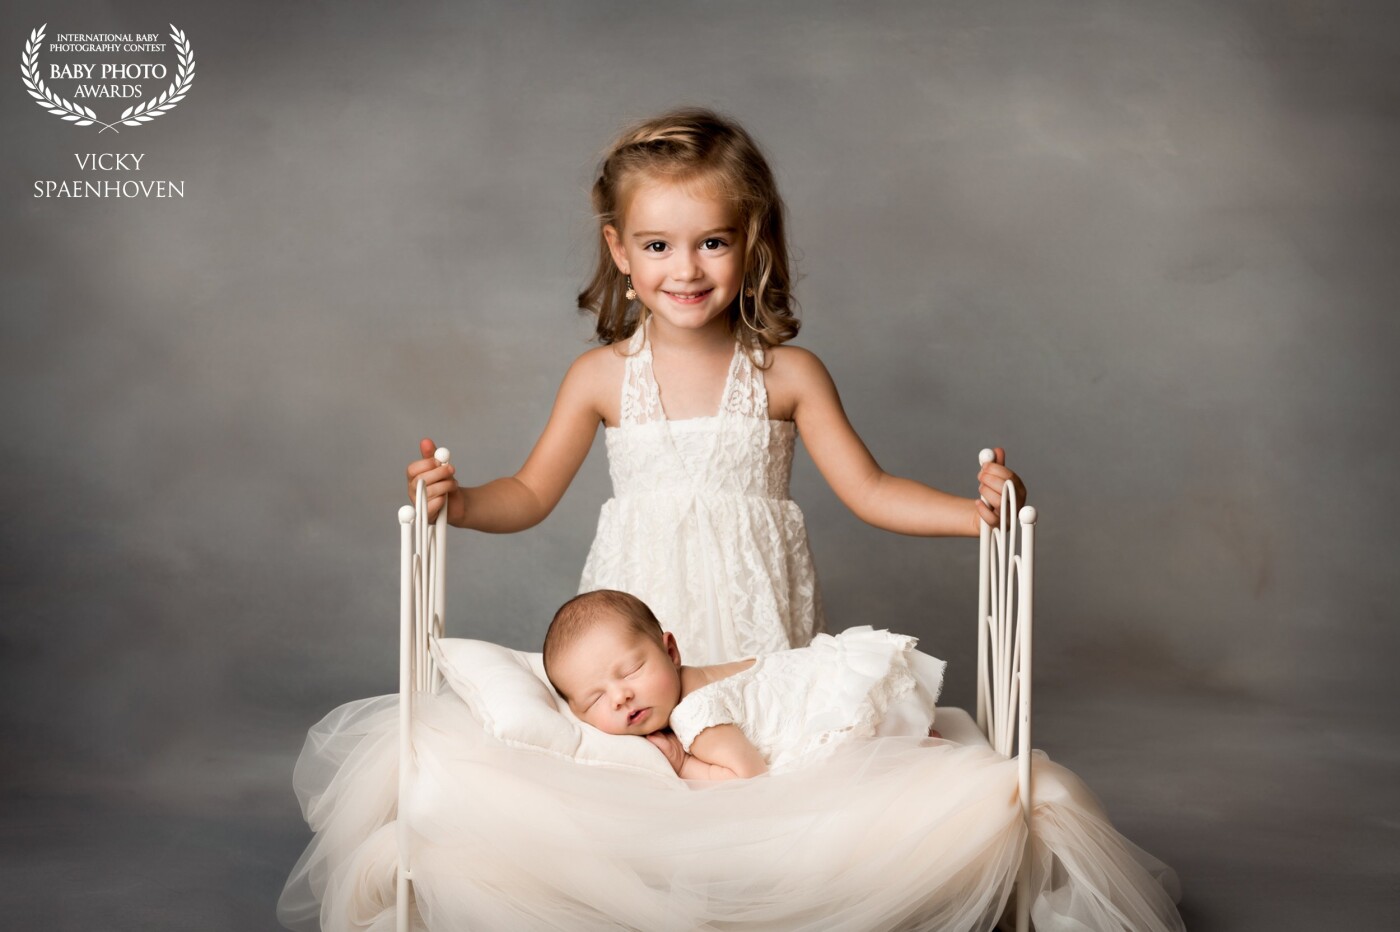 Photographing siblings is always a challenge. You have to have patience and capture the right moment. I'm so happy with this picture. It's one that their parents will love forever.